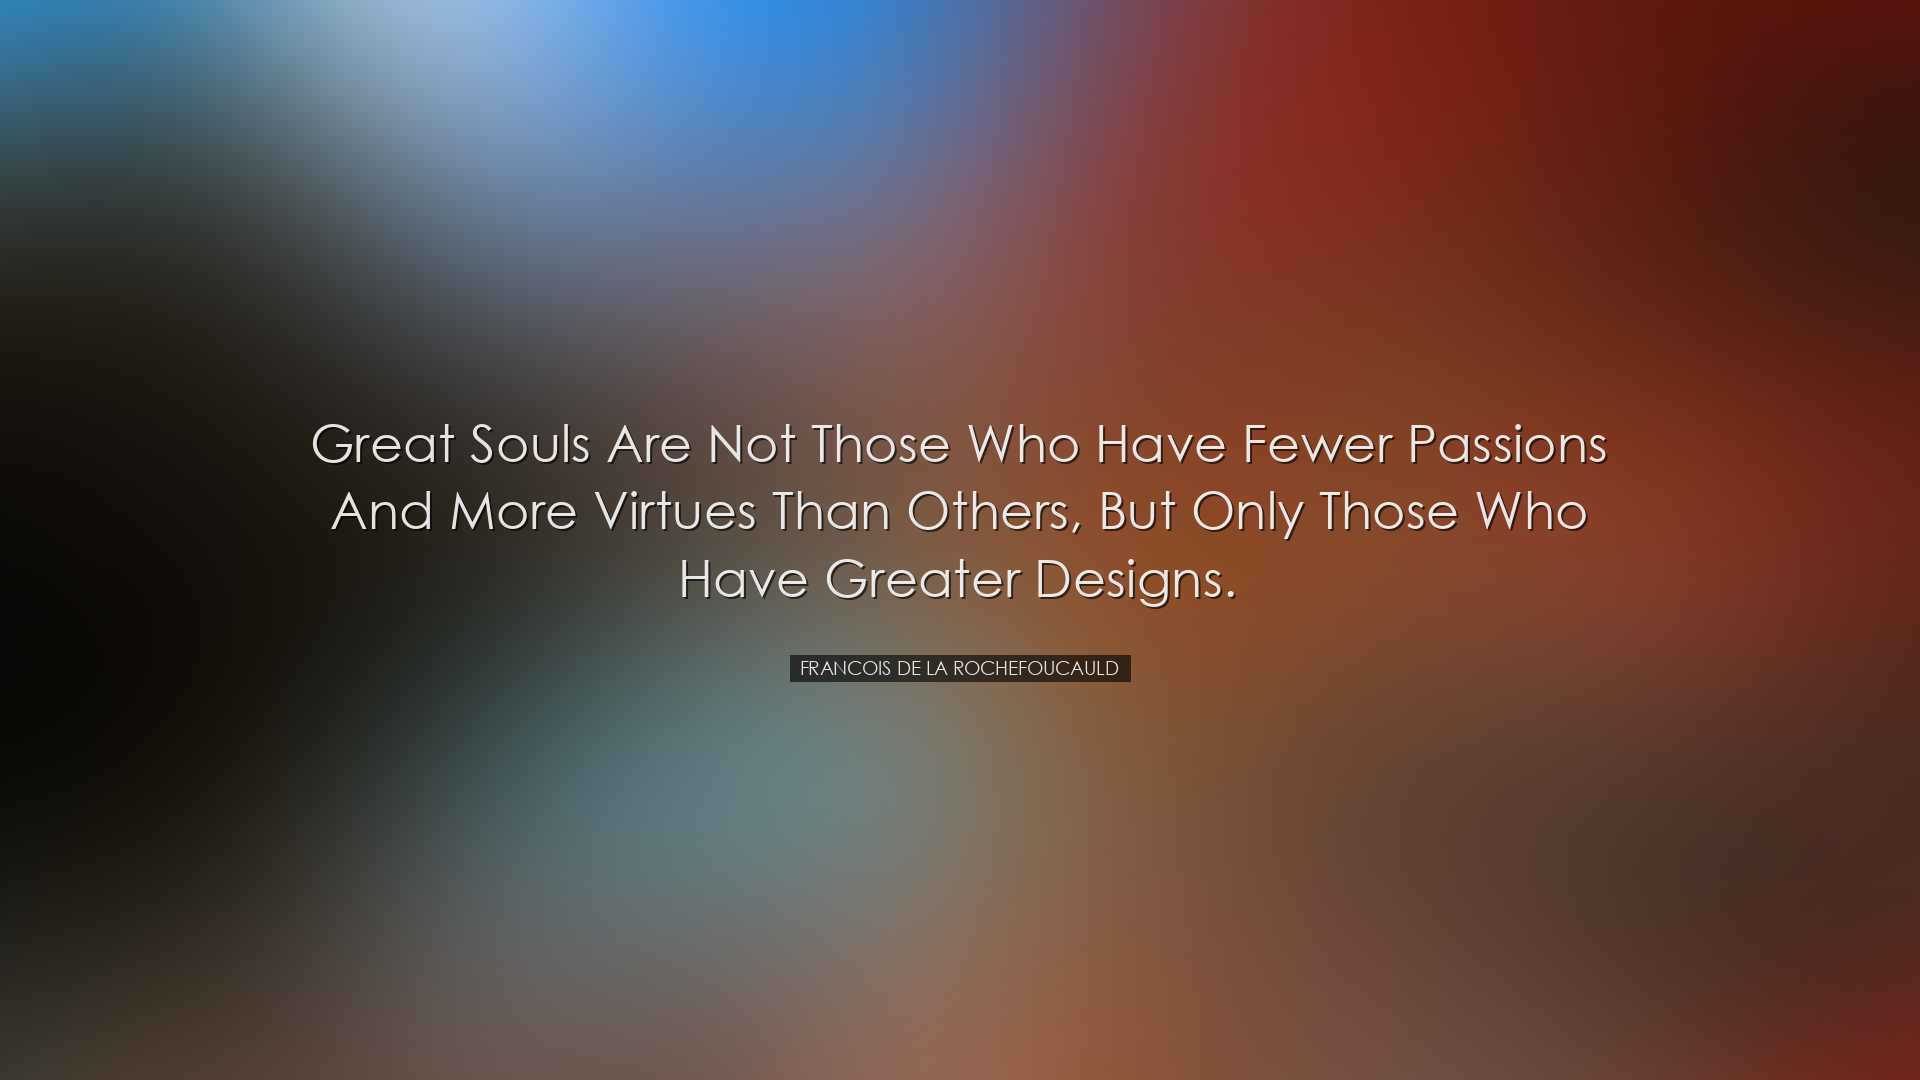 Great souls are not those who have fewer passions and more virtues